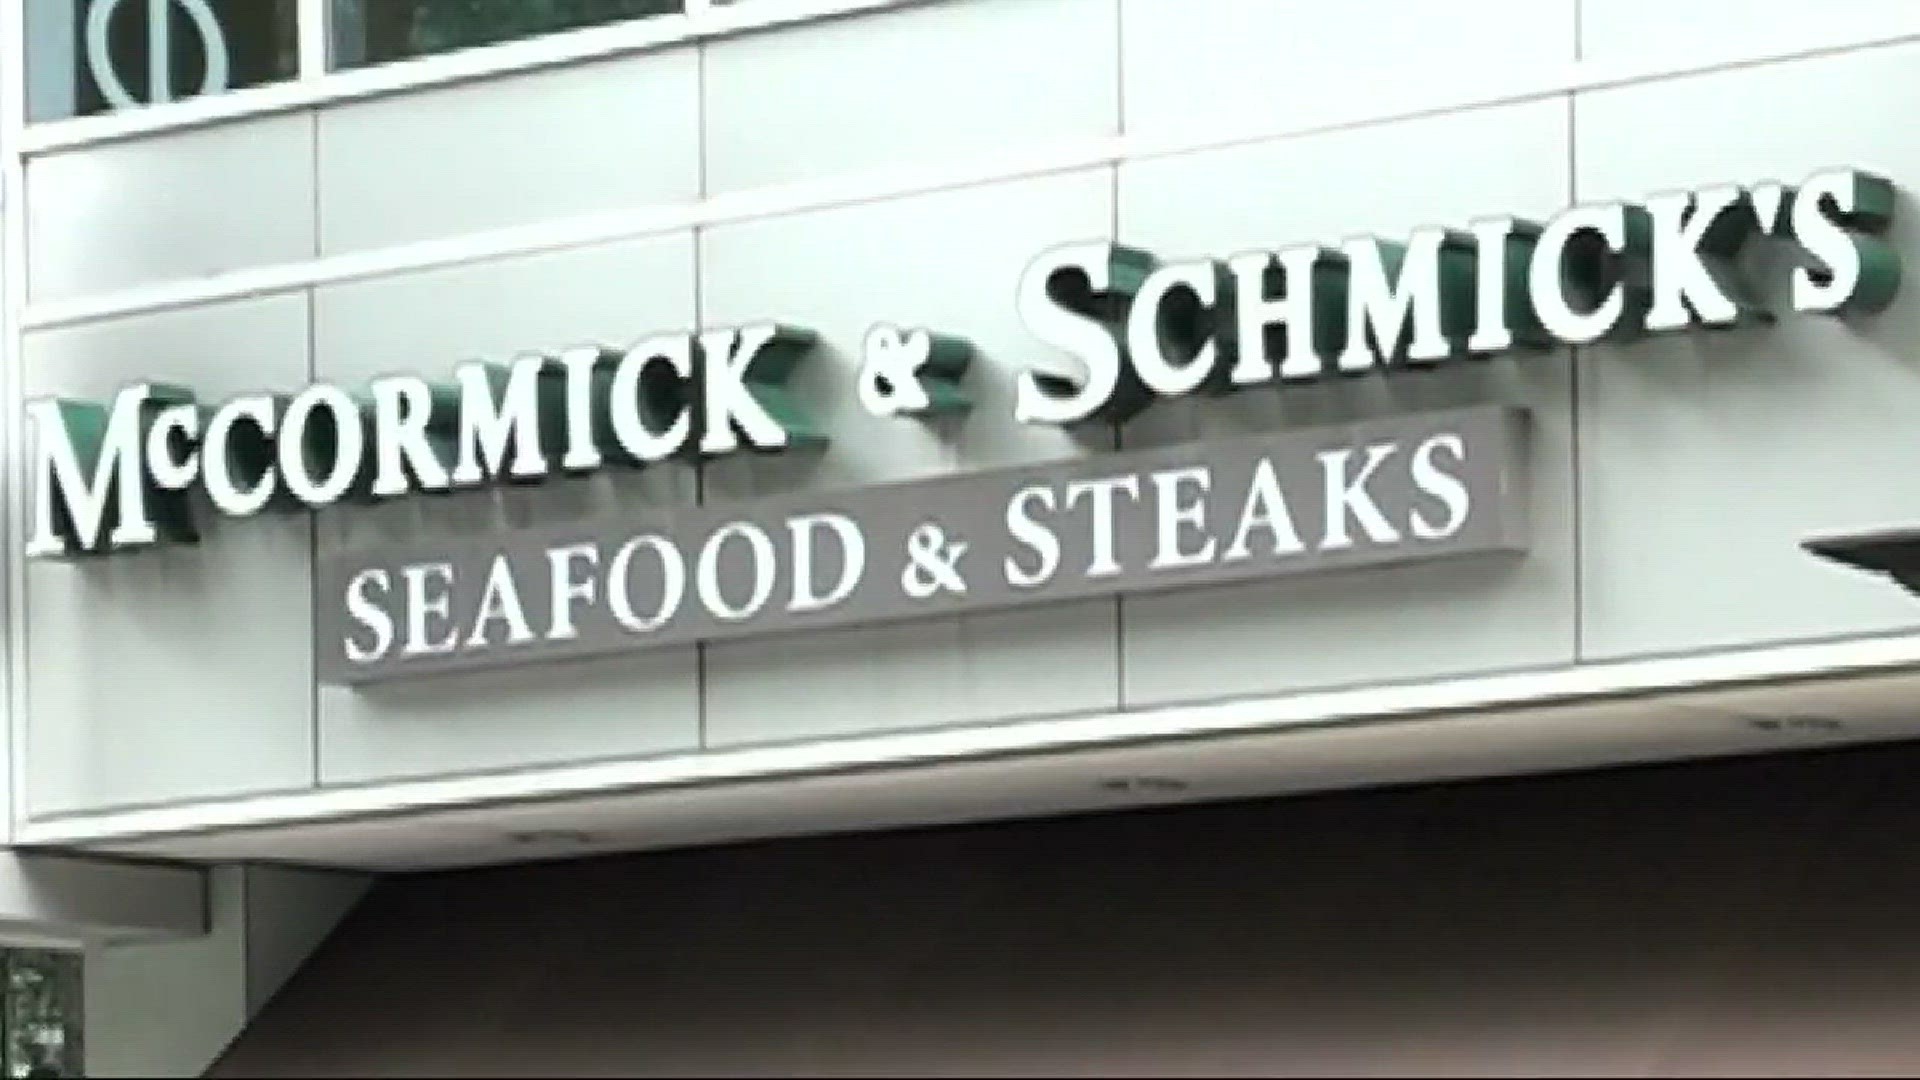 McCormick & Schmicks in Uptown was caught storing raw meat above ready-to-eat food. Shrimp was also thawing at 85 degrees.